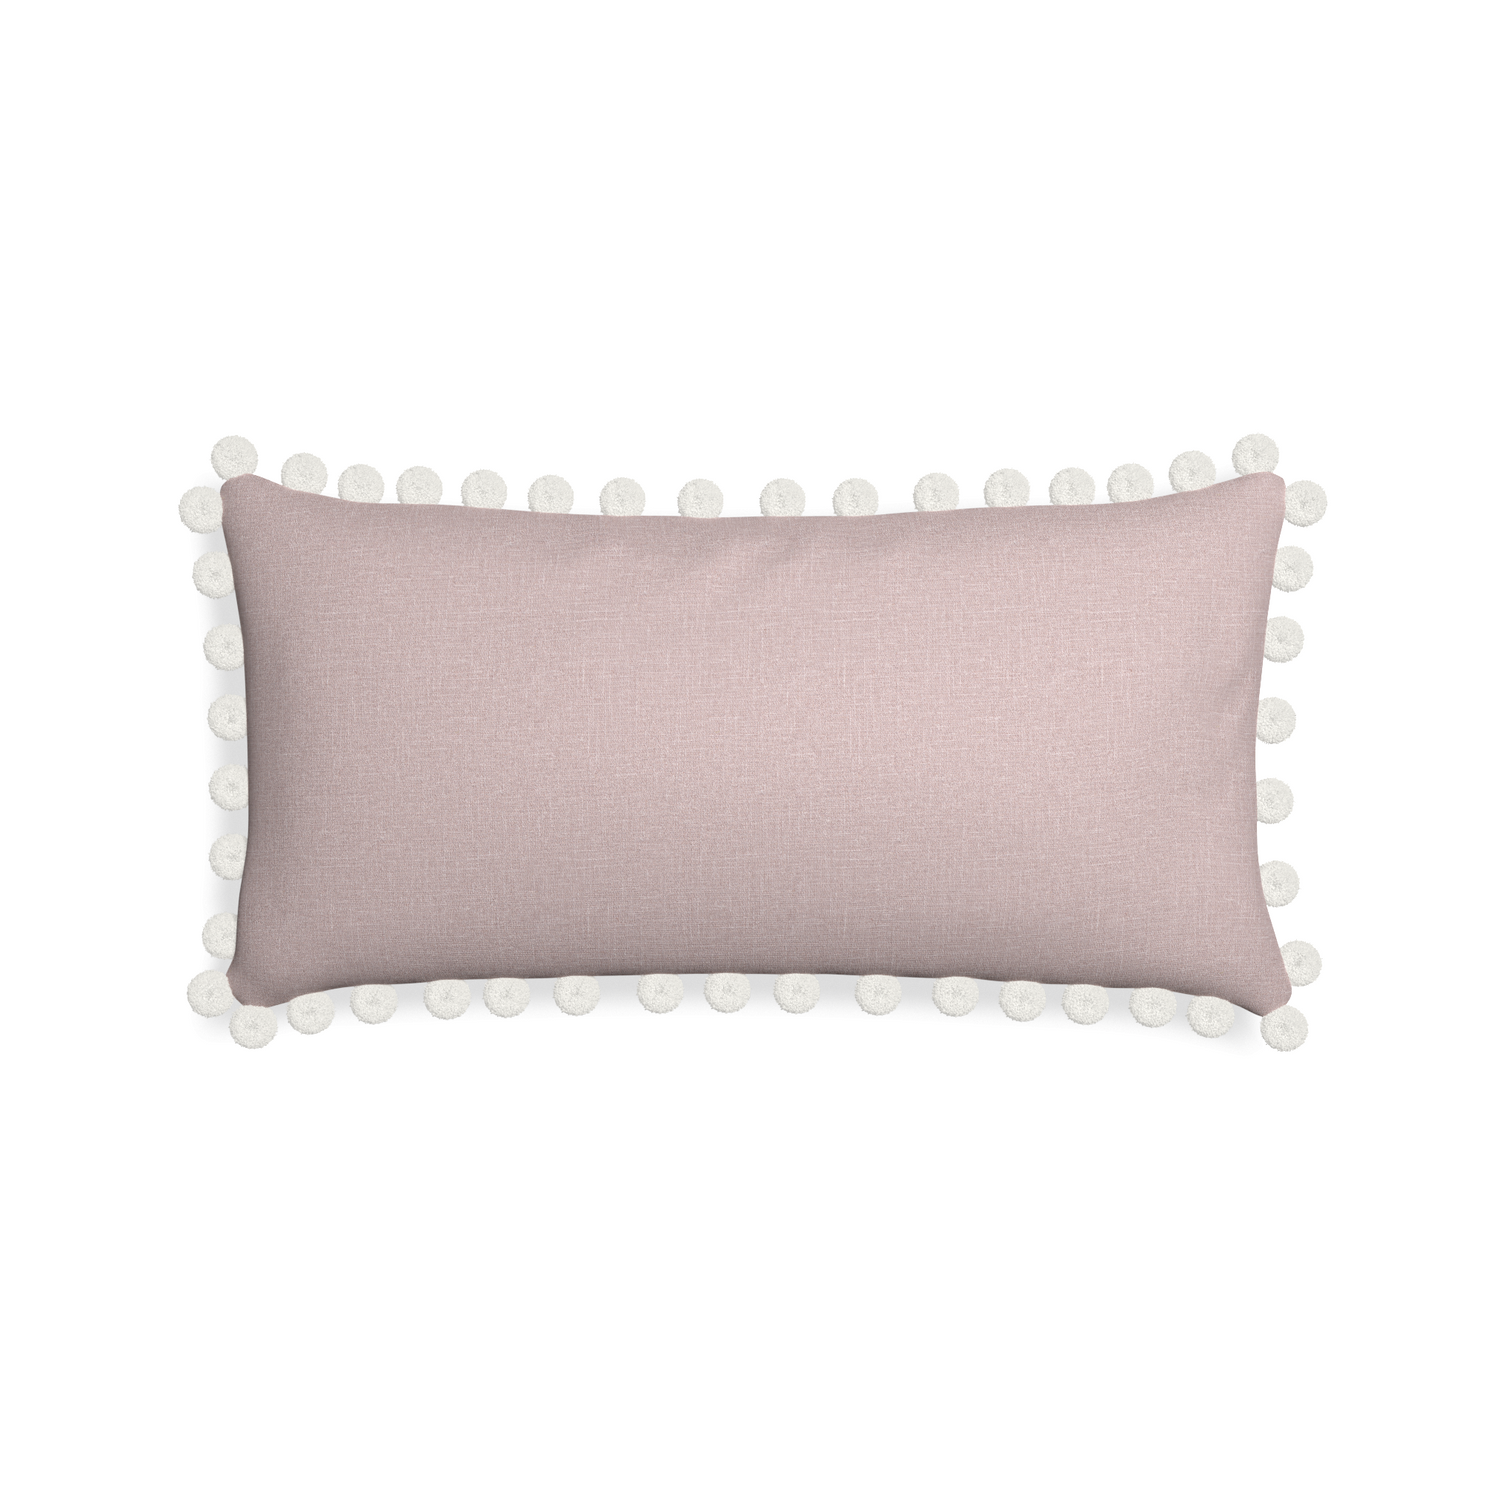 Midi-lumbar orchid custom mauve pinkpillow with snow pom pom on white background